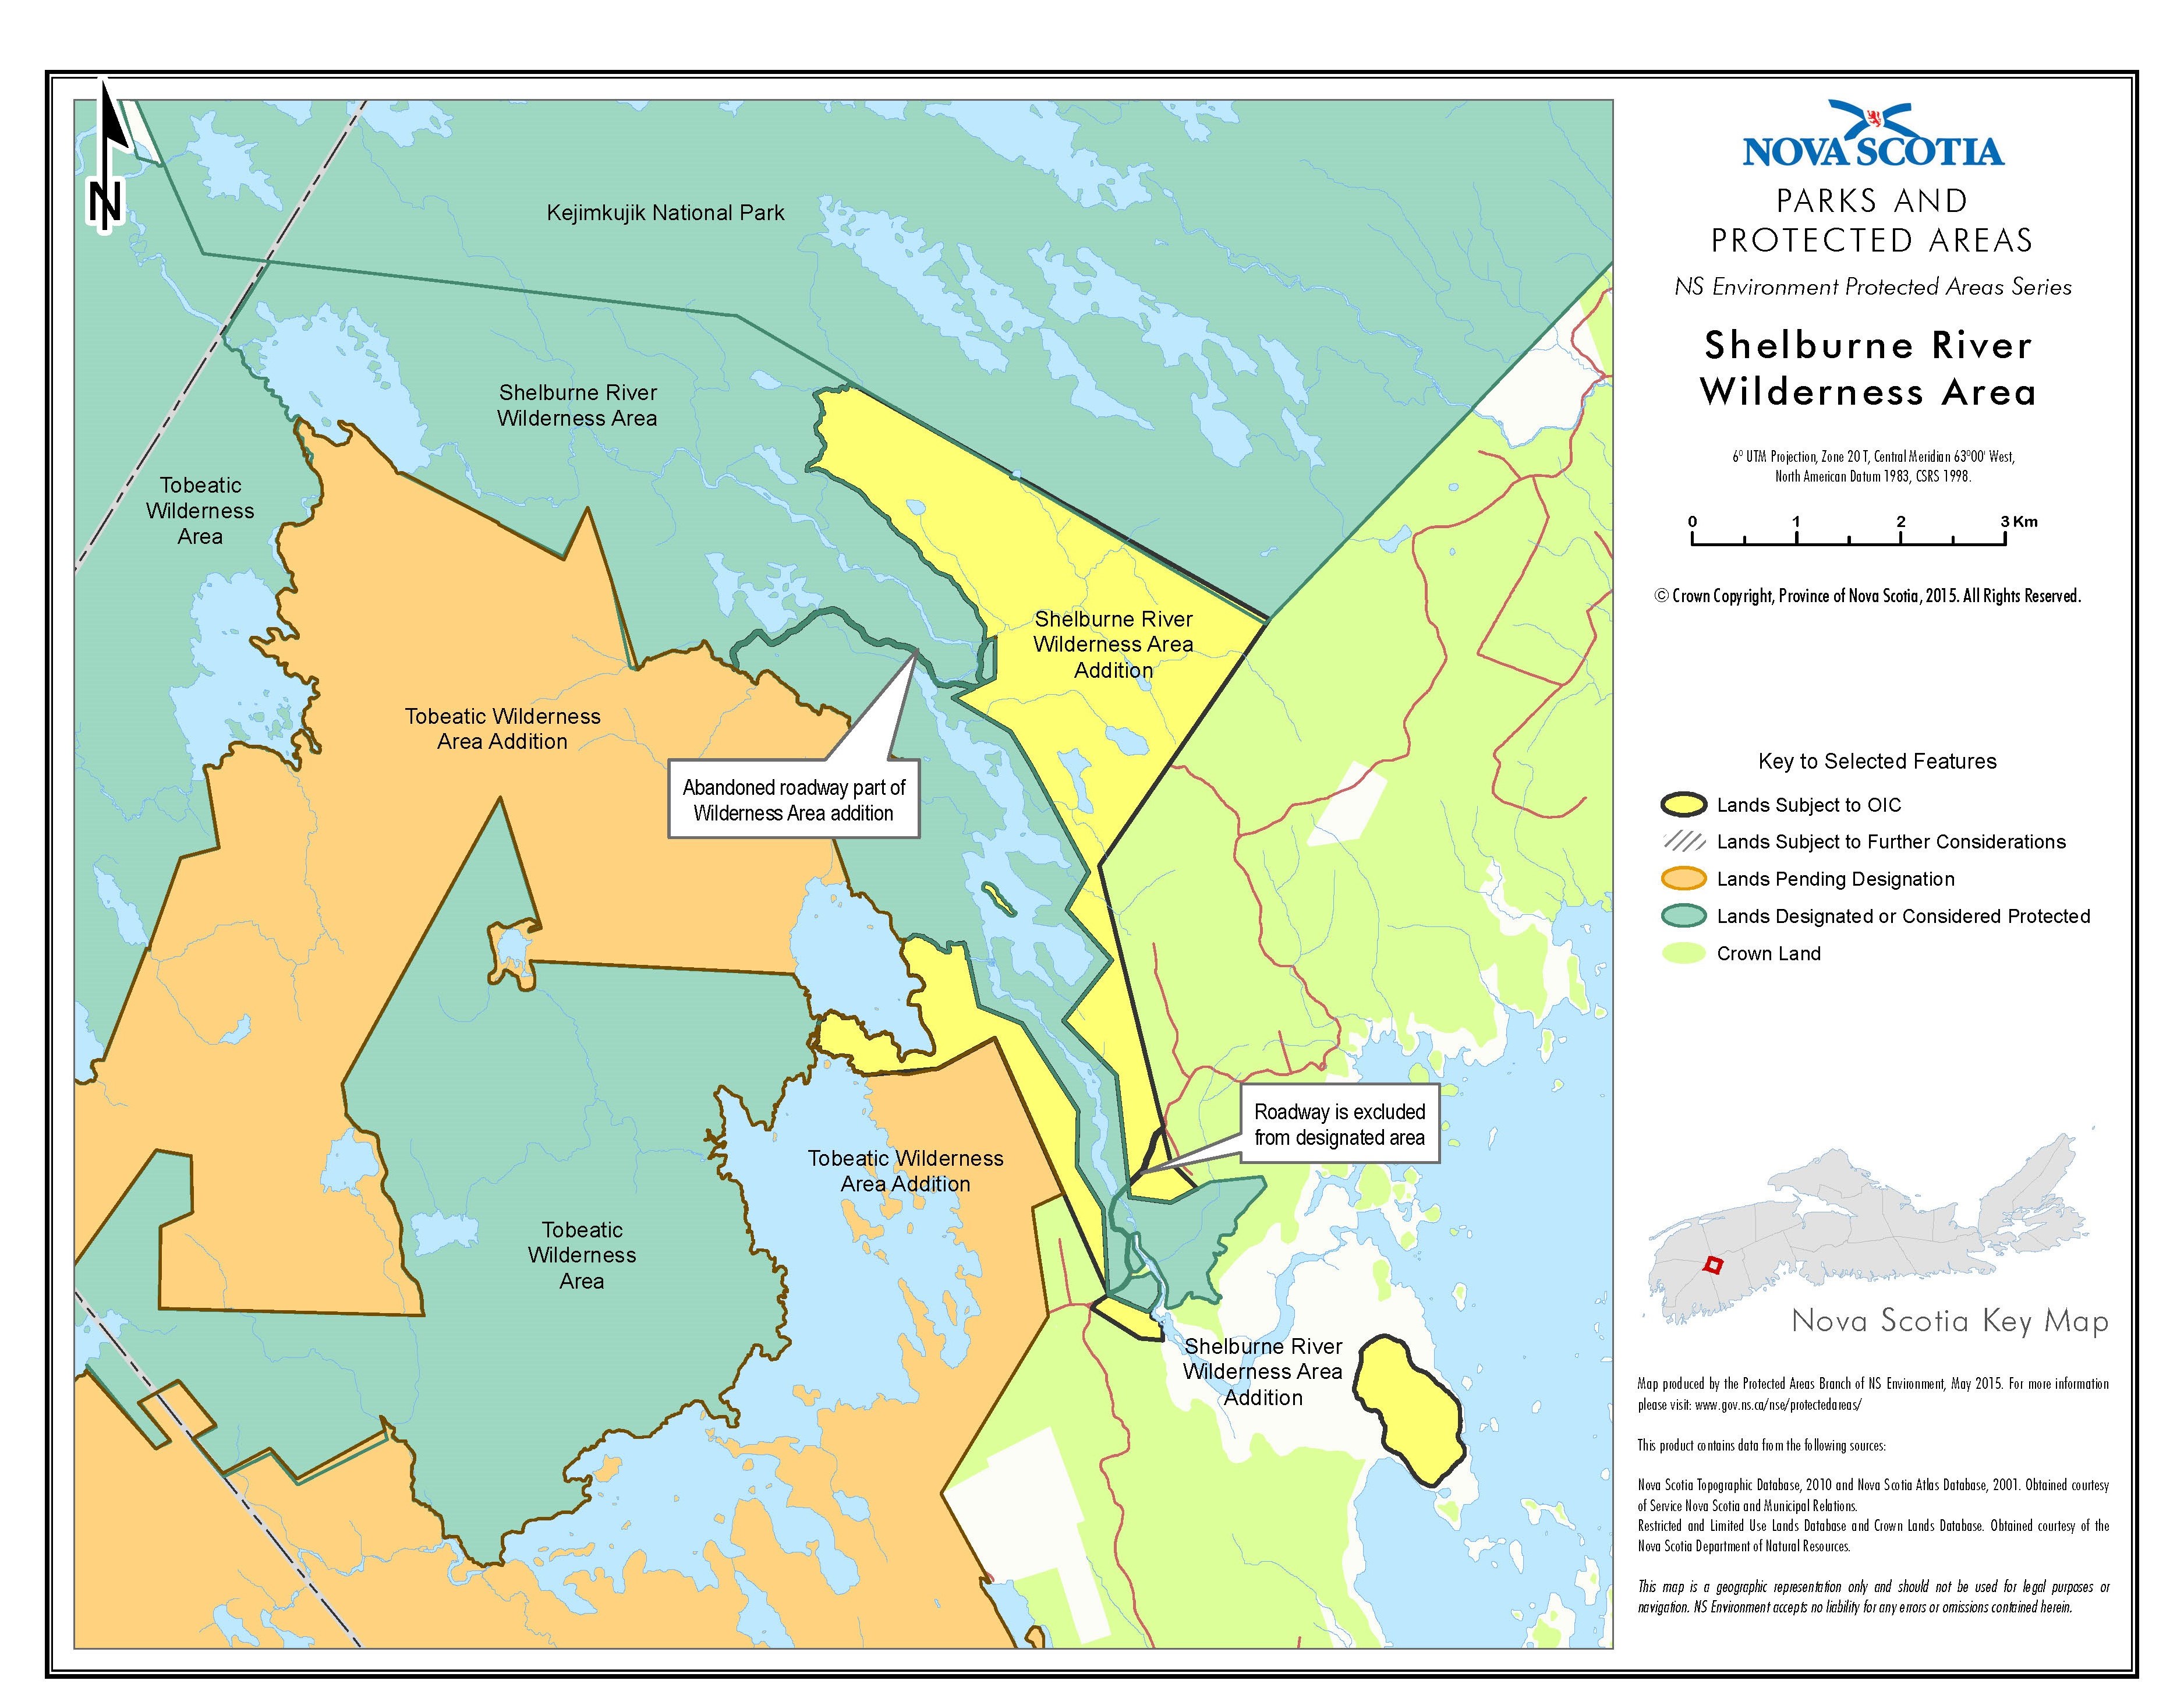 Addition to Shelburne River Wilderness Area